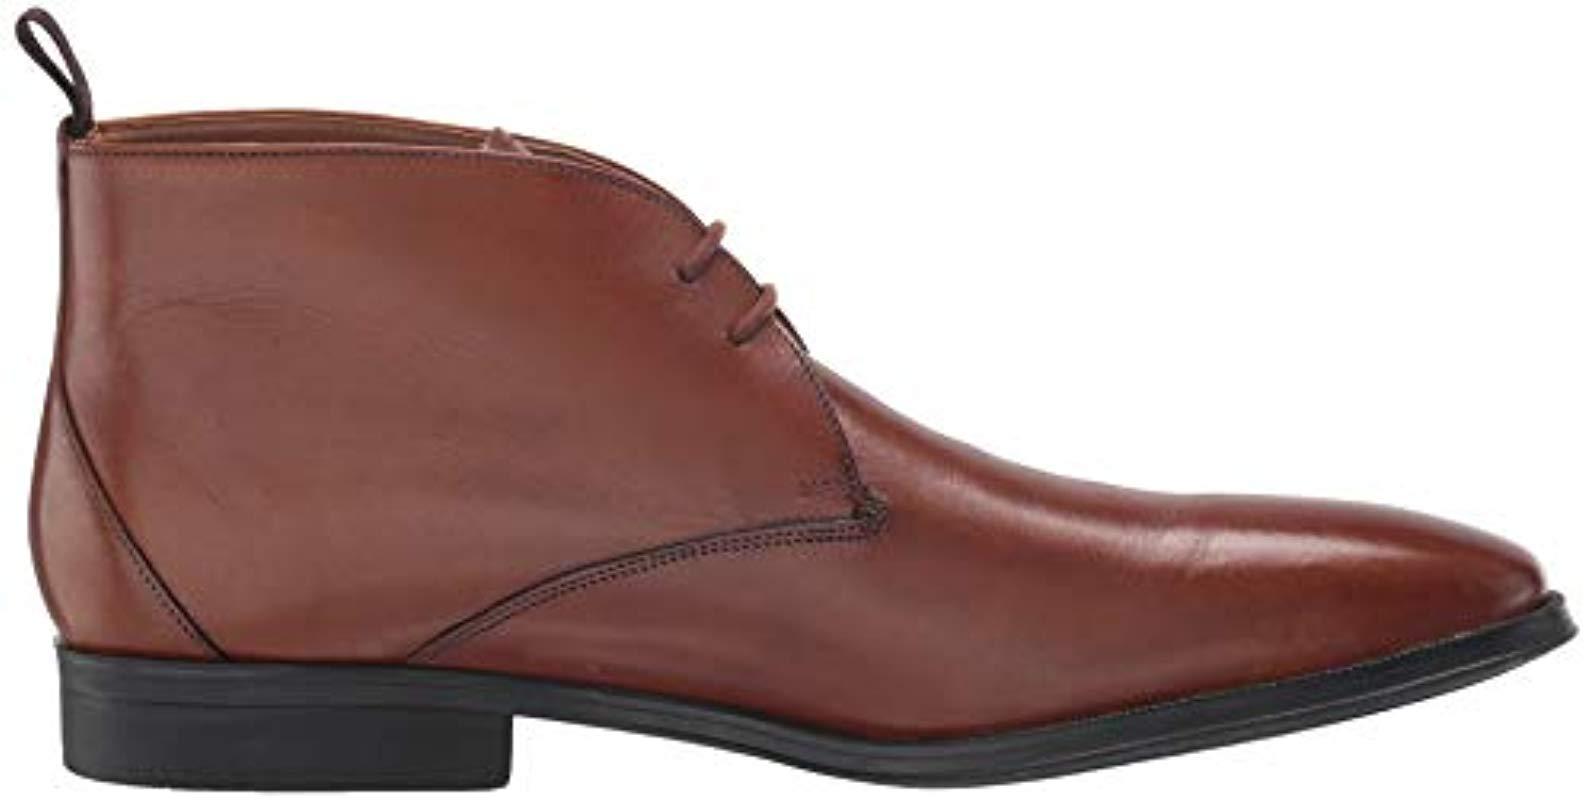 Clarks Leather Gilman Mid Ankle Boot in Dark Tan Leather (Brown) for Men -  Save 65% - Lyst